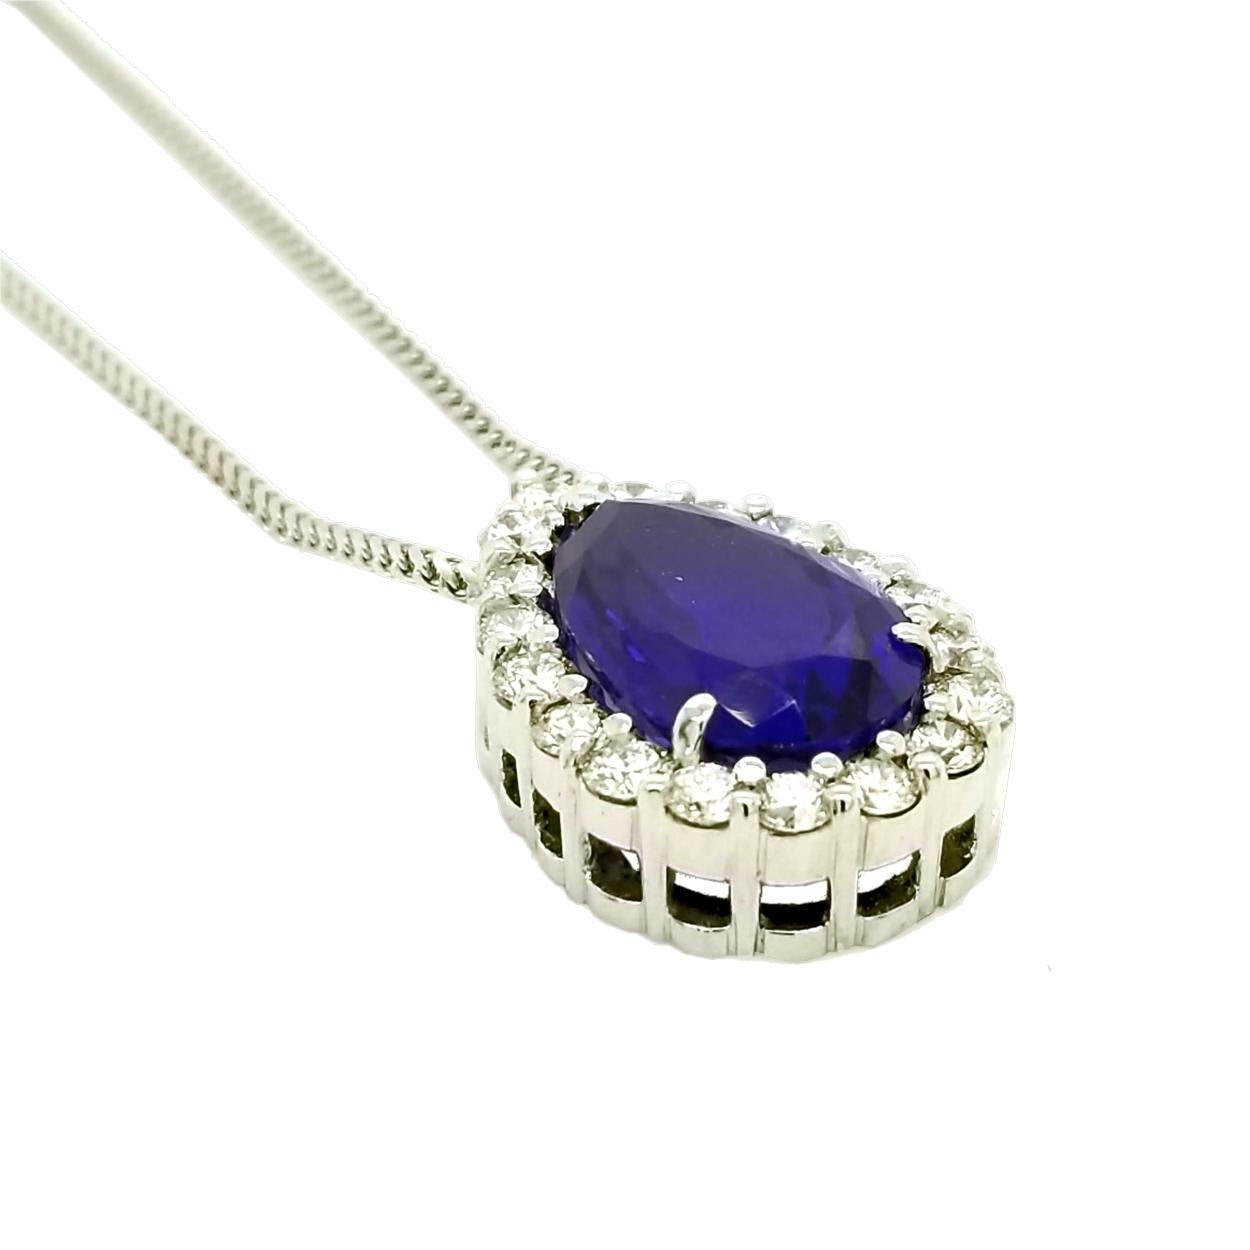 This Beautiful 18K Tear Drop Necklace with 18 2.6 mm Natural Round Diamonds total weight of 1.29 Ct (Shared Prong Set) hosts a magnificent color Tanzanite weighing 7.78 Ct.
Center Stone: 
GIA Certified 7.78 Ct Tanzanite
Dimension: 15.77x10.16x6.73